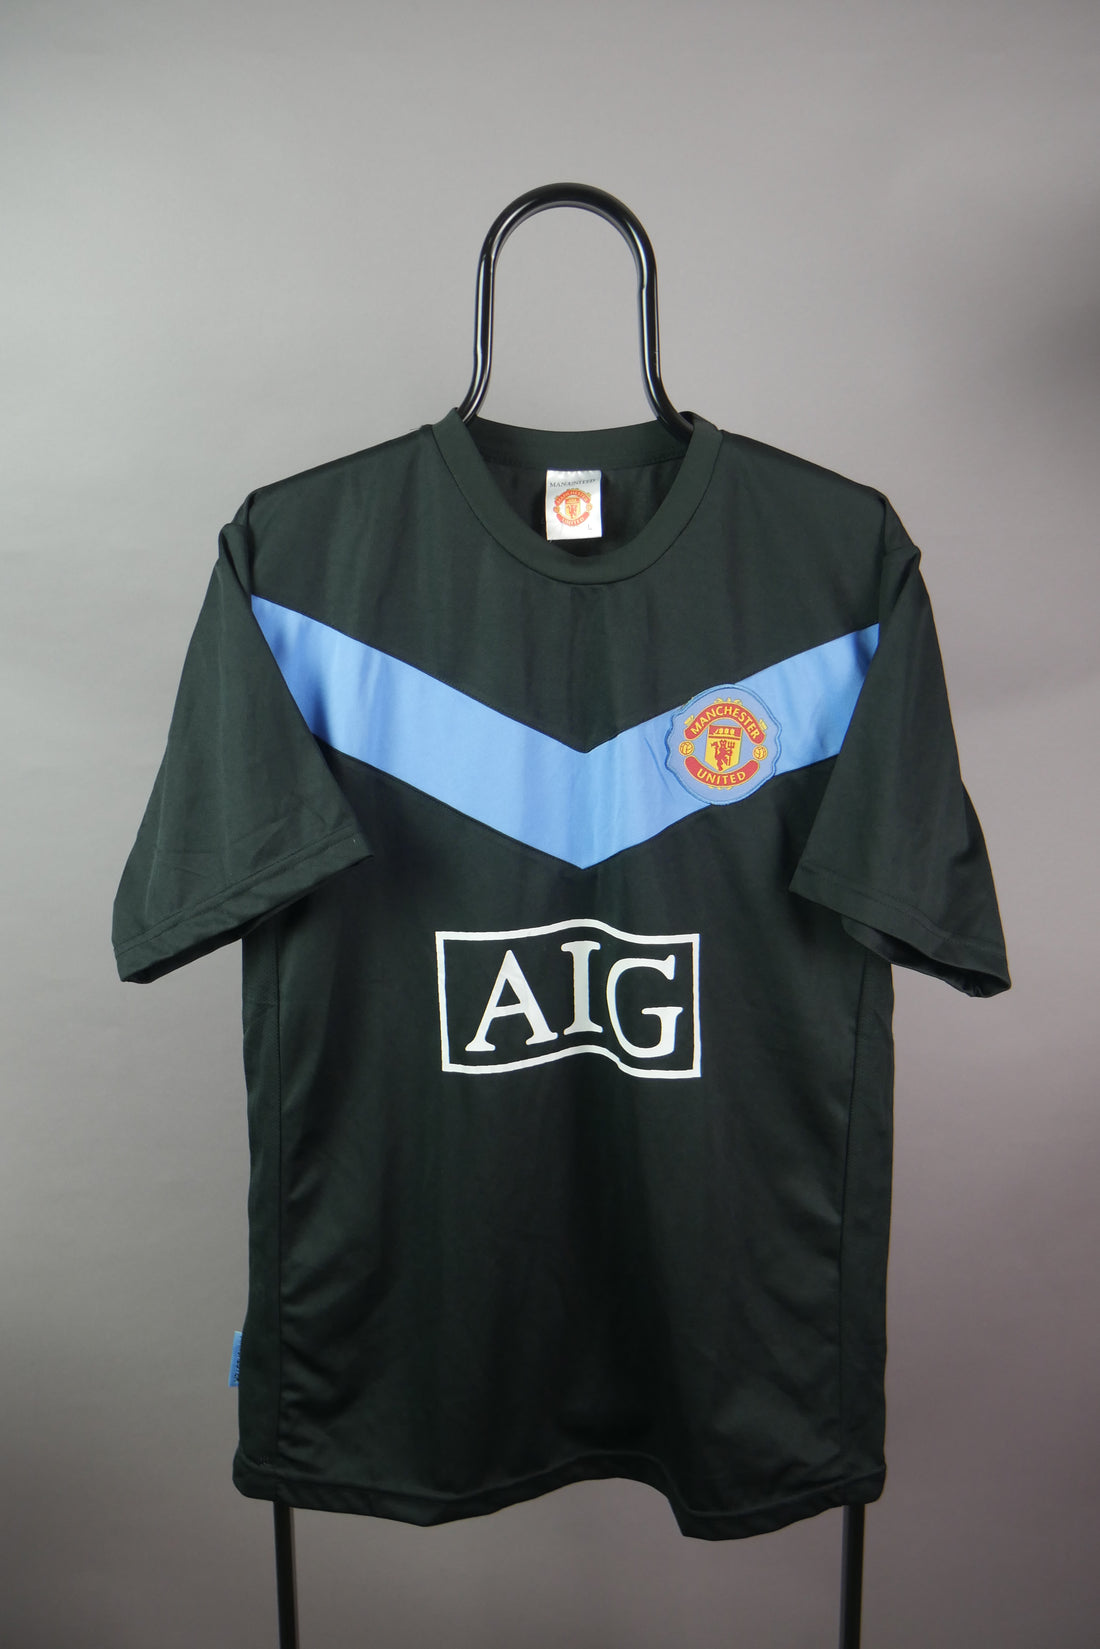 The Manchester United Football T-Shirt (L)